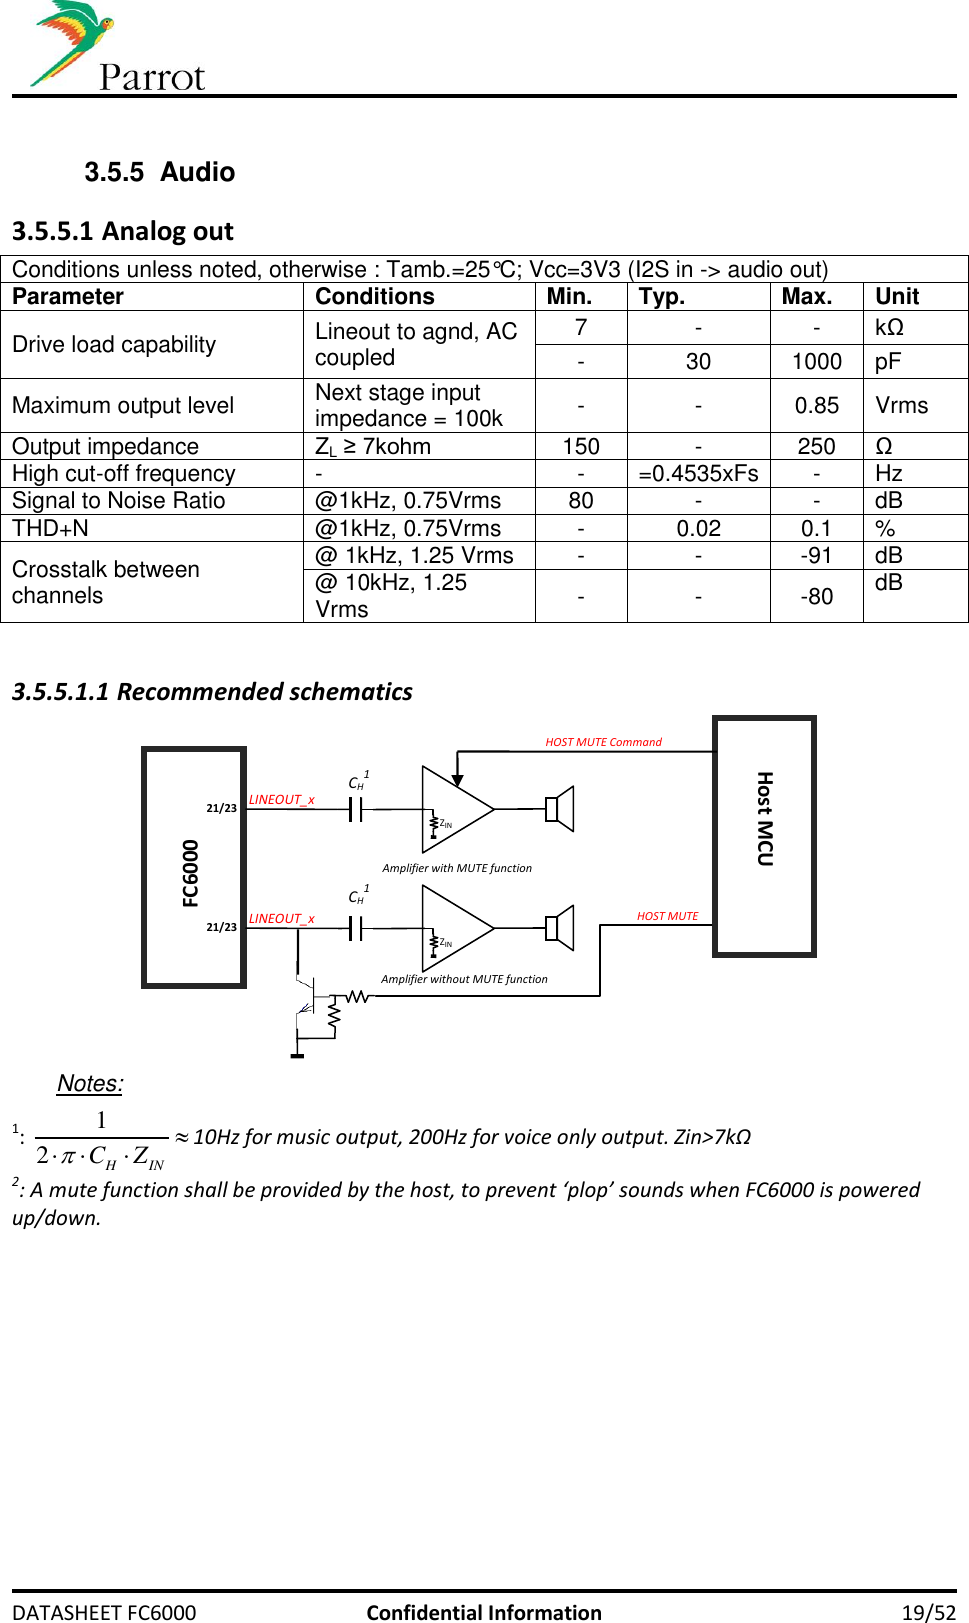     DATASHEET FC6000  Confidential Information 19/52  3.5.5  Audio 3.5.5.1 Analog out Conditions unless noted, otherwise : Tamb.=25°C; Vcc=3V3 (I2S in -&gt; audio out) Parameter Conditions Min. Typ. Max. Unit Drive load capability Lineout to agnd, AC coupled 7 - - kΩ - 30 1000 pF Maximum output level Next stage input impedance = 100k - - 0.85 Vrms Output impedance ZL ≥ 7kohm 150 - 250 Ω High cut-off frequency - - =0.4535xFs - Hz Signal to Noise Ratio @1kHz, 0.75Vrms 80 - - dB THD+N @1kHz, 0.75Vrms - 0.02 0.1 % Crosstalk between channels @ 1kHz, 1.25 Vrms - - -91 dB @ 10kHz, 1.25 Vrms - - -80 dB  3.5.5.1.1 Recommended schematics    Notes: 1: 12H INCZ  10Hz for music output, 200Hz for voice only output. Zin&gt;7kΩ 2: A mute function shall be provided by the host, to prevent ‘plop’ sounds when FC6000 is powered up/down.  LINEOUT_x FC6000 CH1 ZIN Host MCU Amplifier with MUTE function HOST MUTE Command LINEOUT_x CH1  ZIN Amplifier without MUTE function HOST MUTE 21/23 21/23 